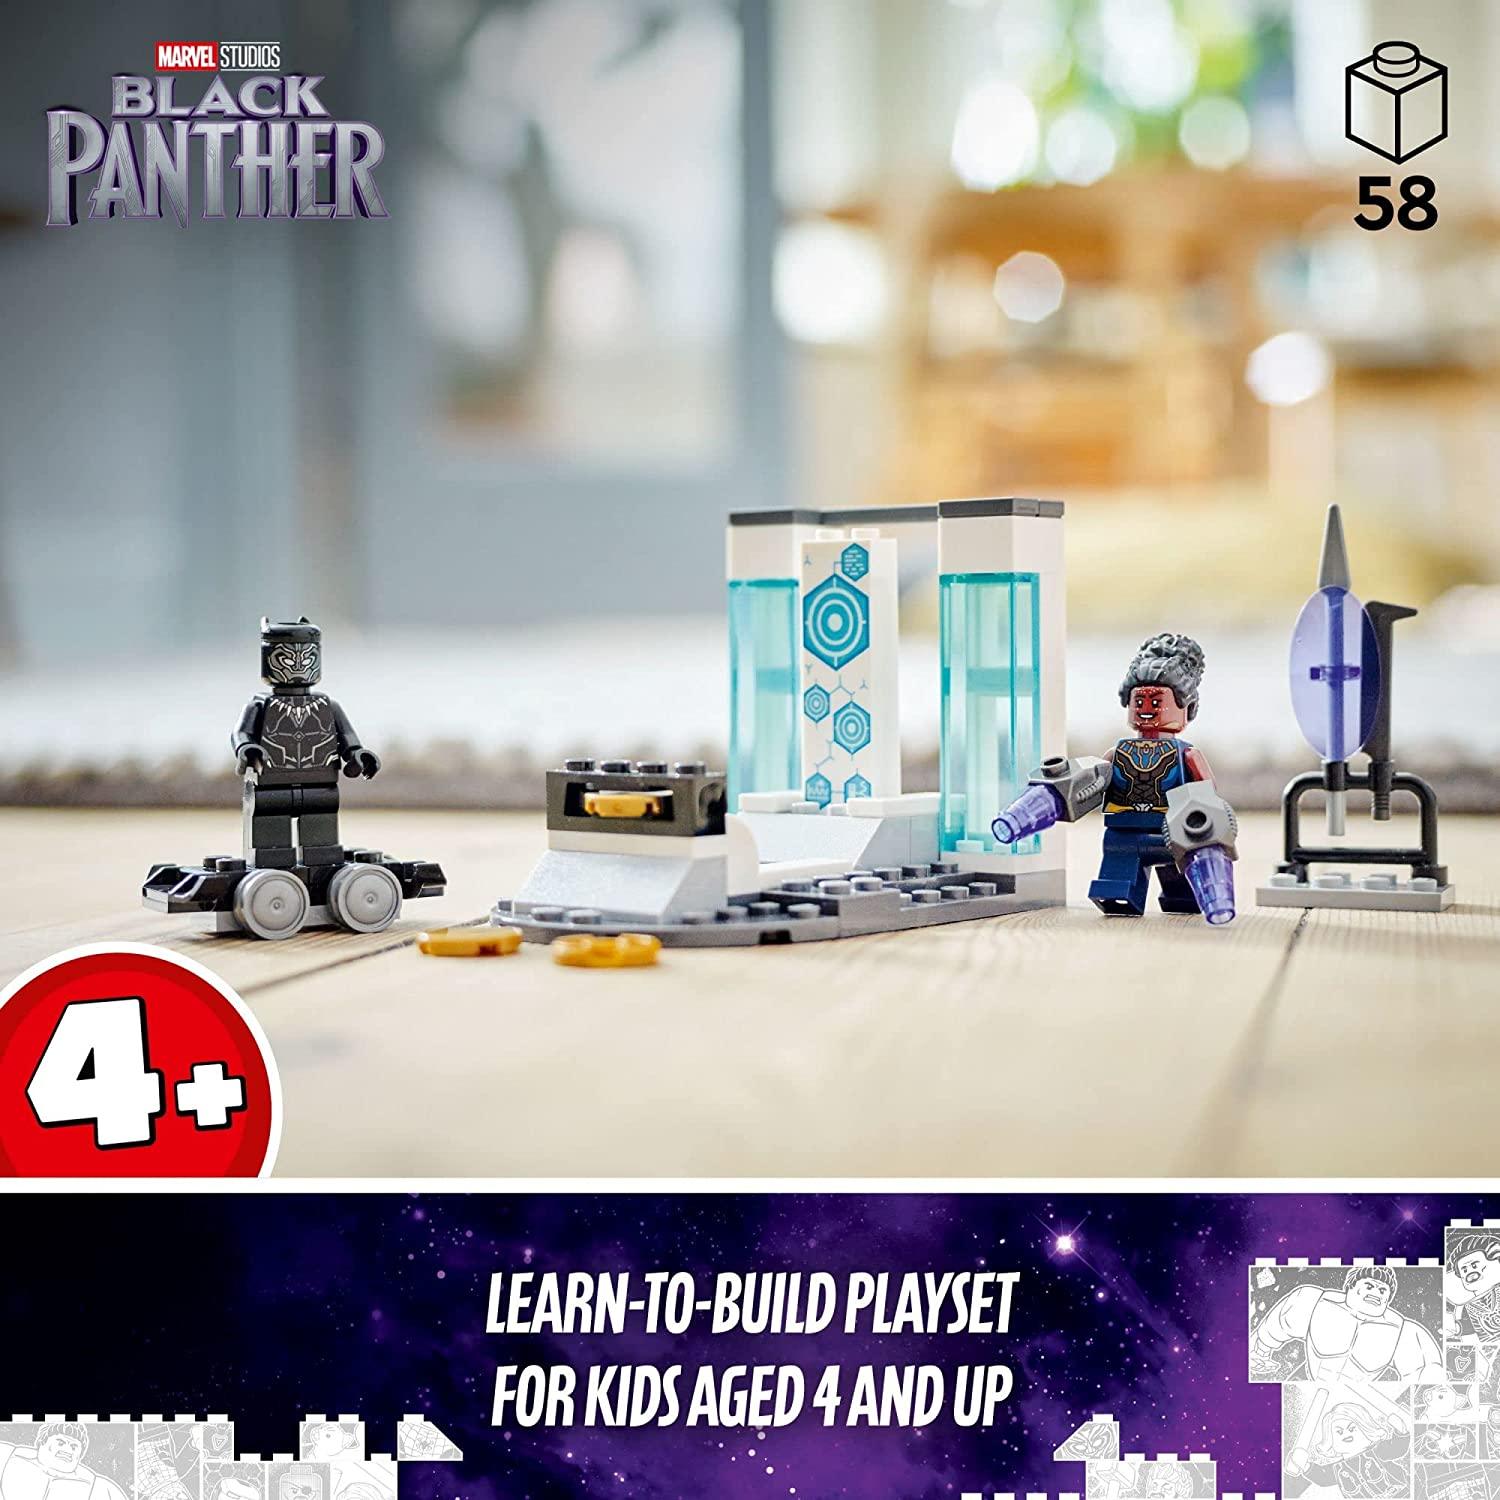 LEGO 76212 Marvel Shuri's Lab, Black Panther Construction Learning Toy with Minifigures - BumbleToys - 14 Years & Up, 18+, Boys, LEGO, Marvel, OXE, Pre-Order